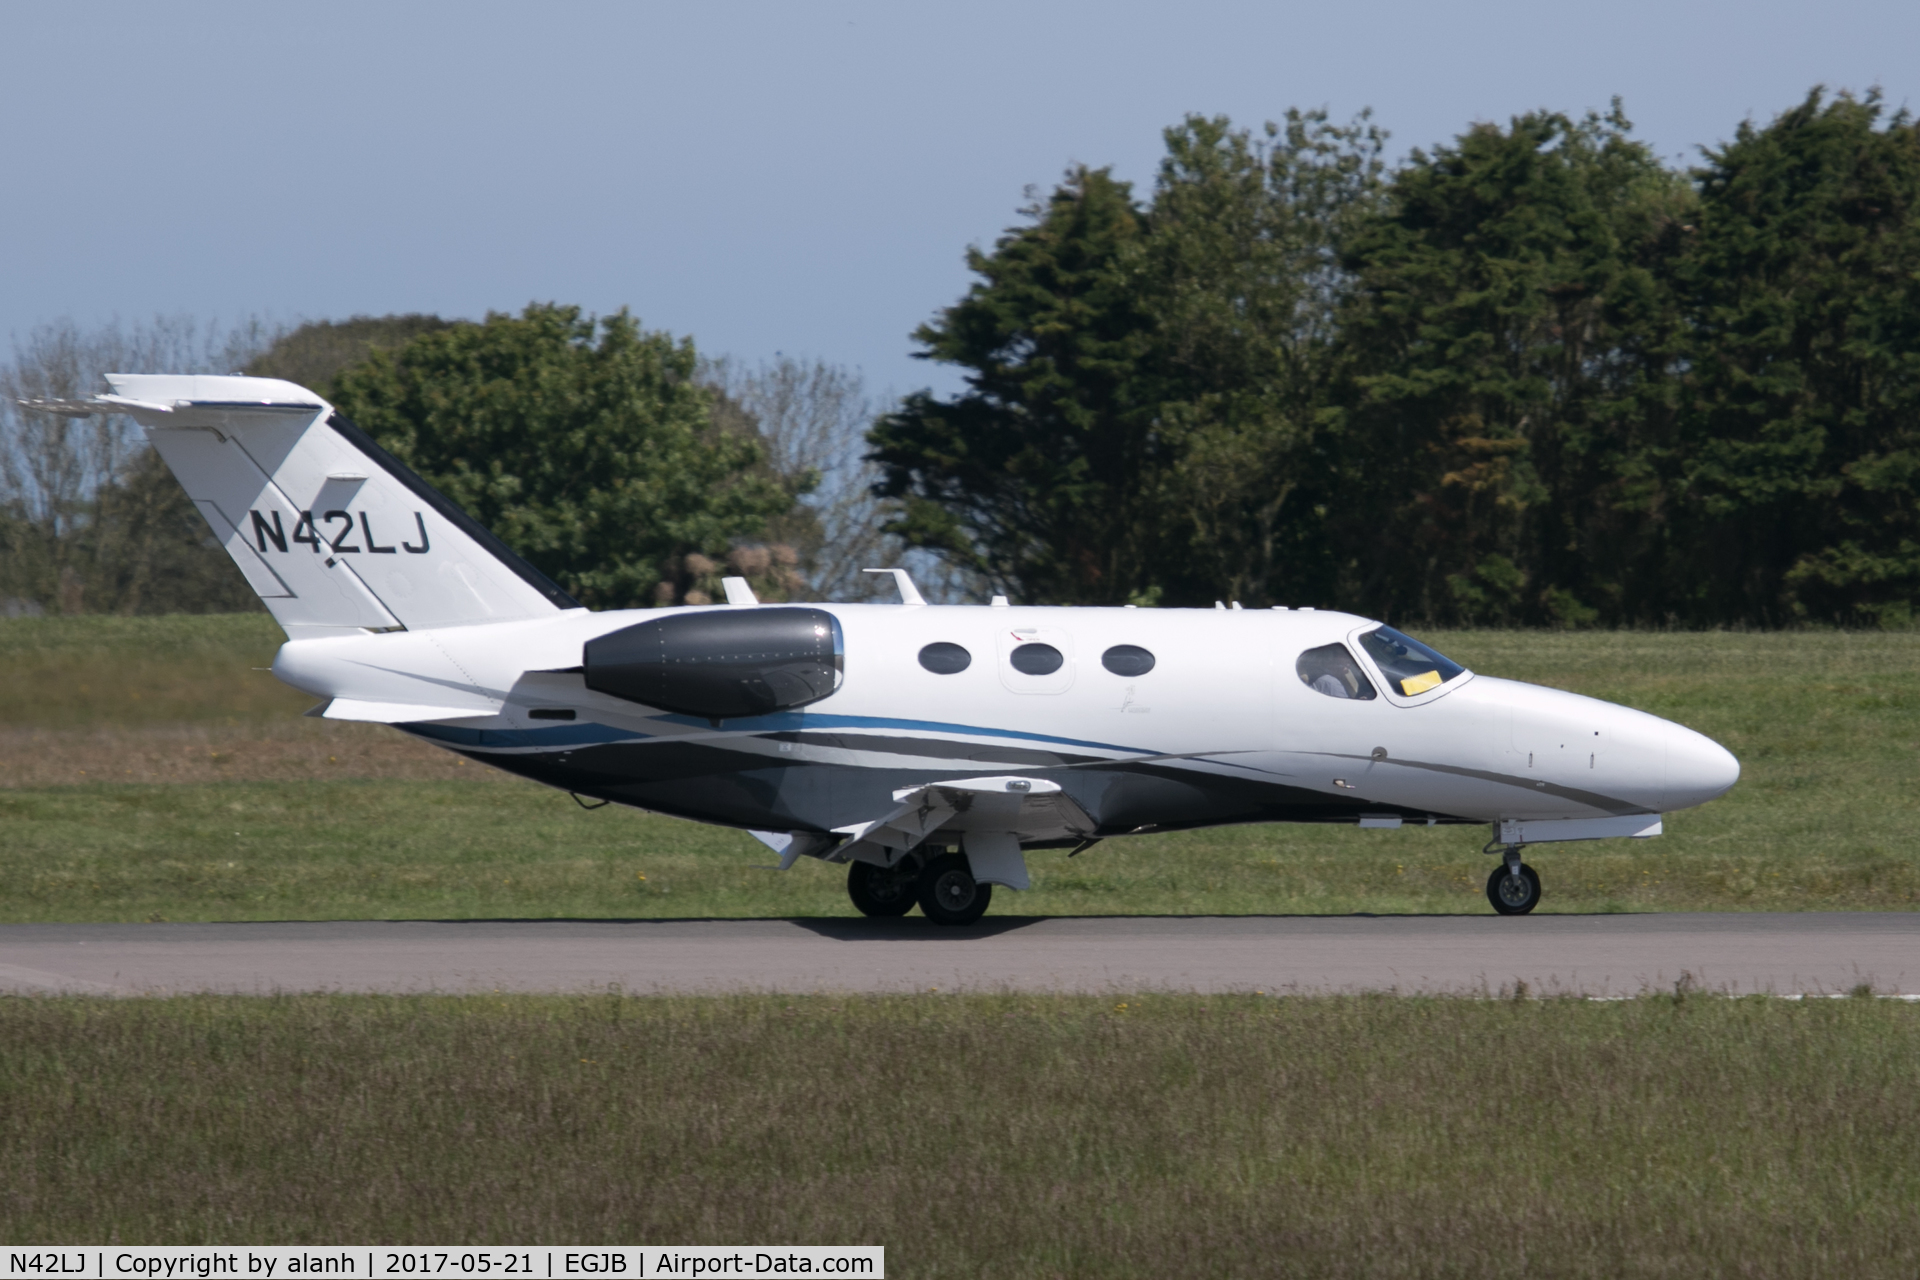 N42LJ, 2015 Cessna 510 Citation Mustang Citation Mustang C/N 510-0462, Rolling out after arrival in Guernsey